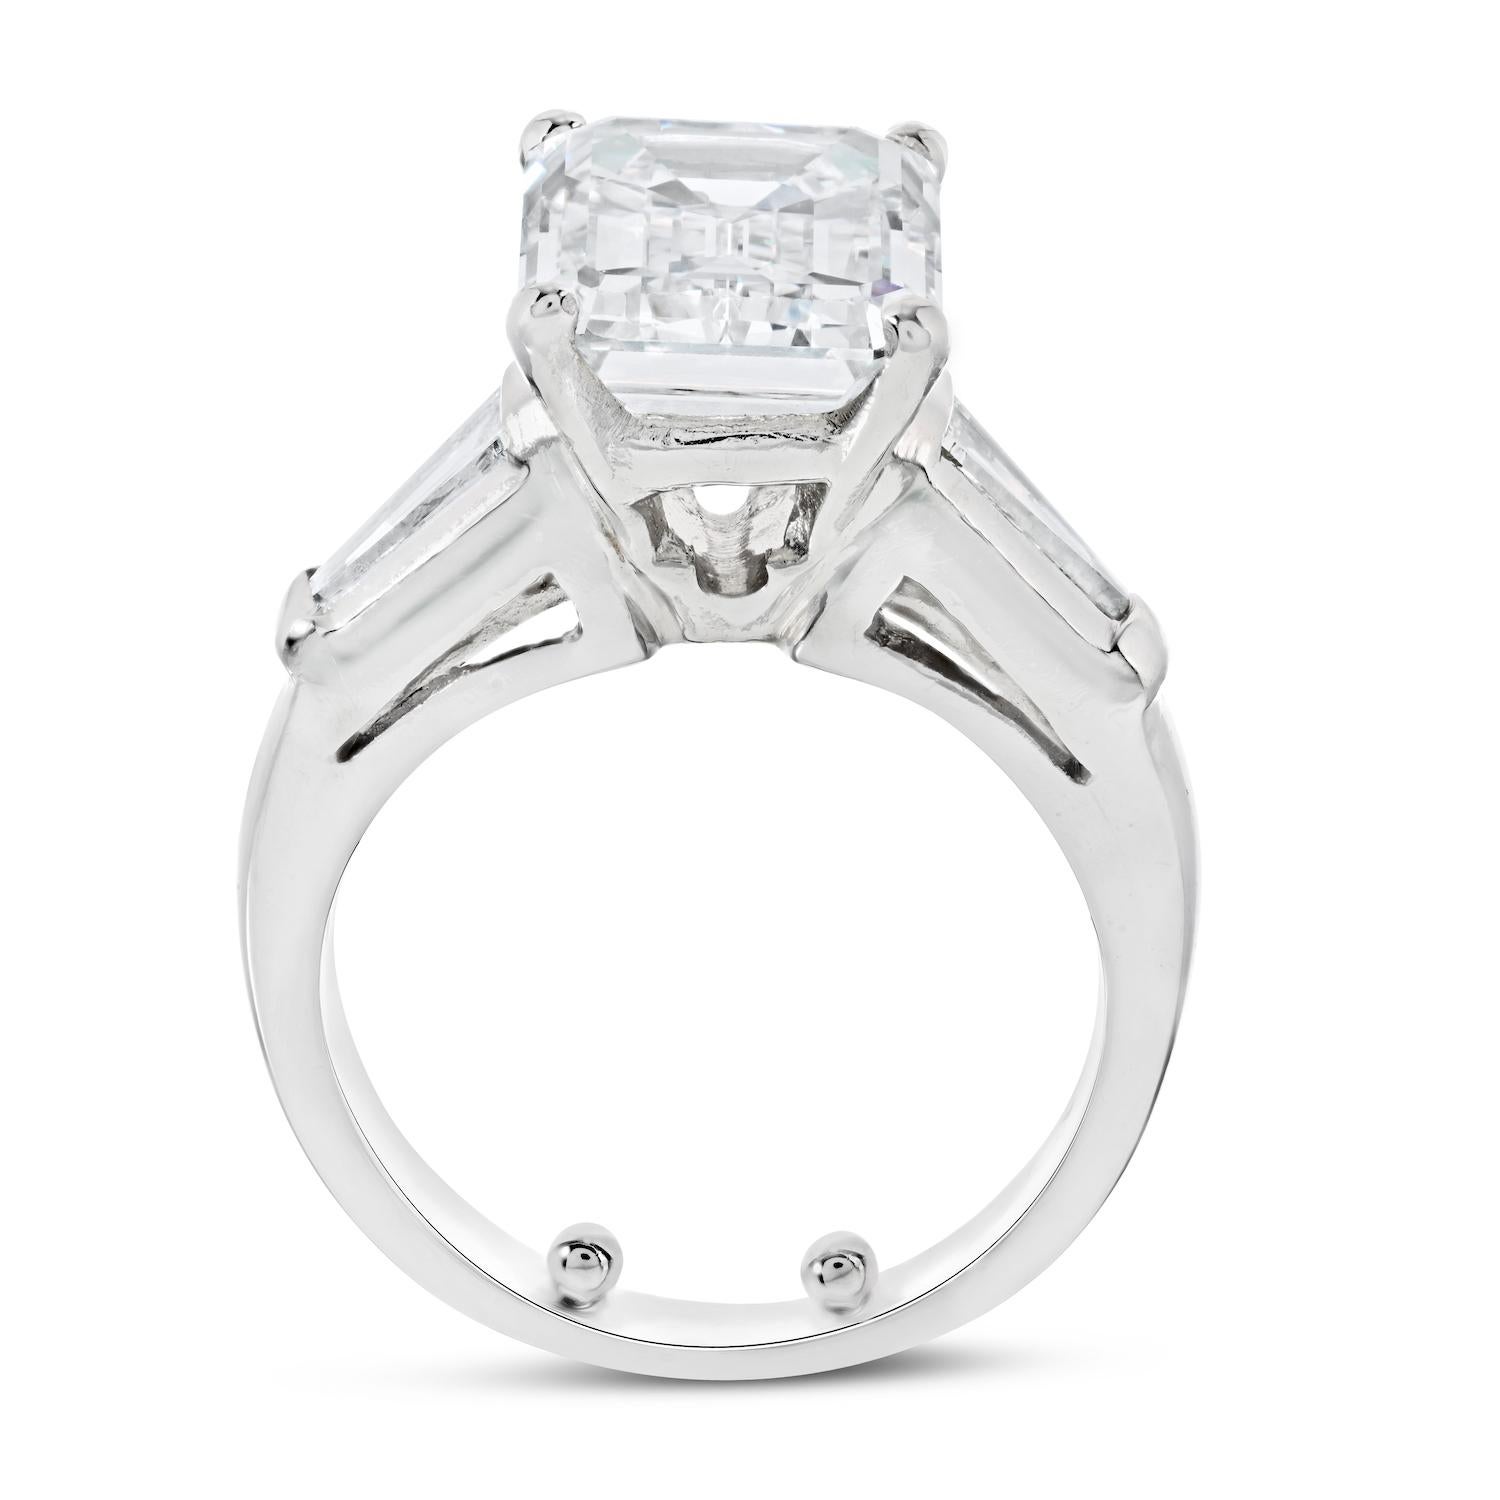 4 carat emerald cut diamond ring with baguettes